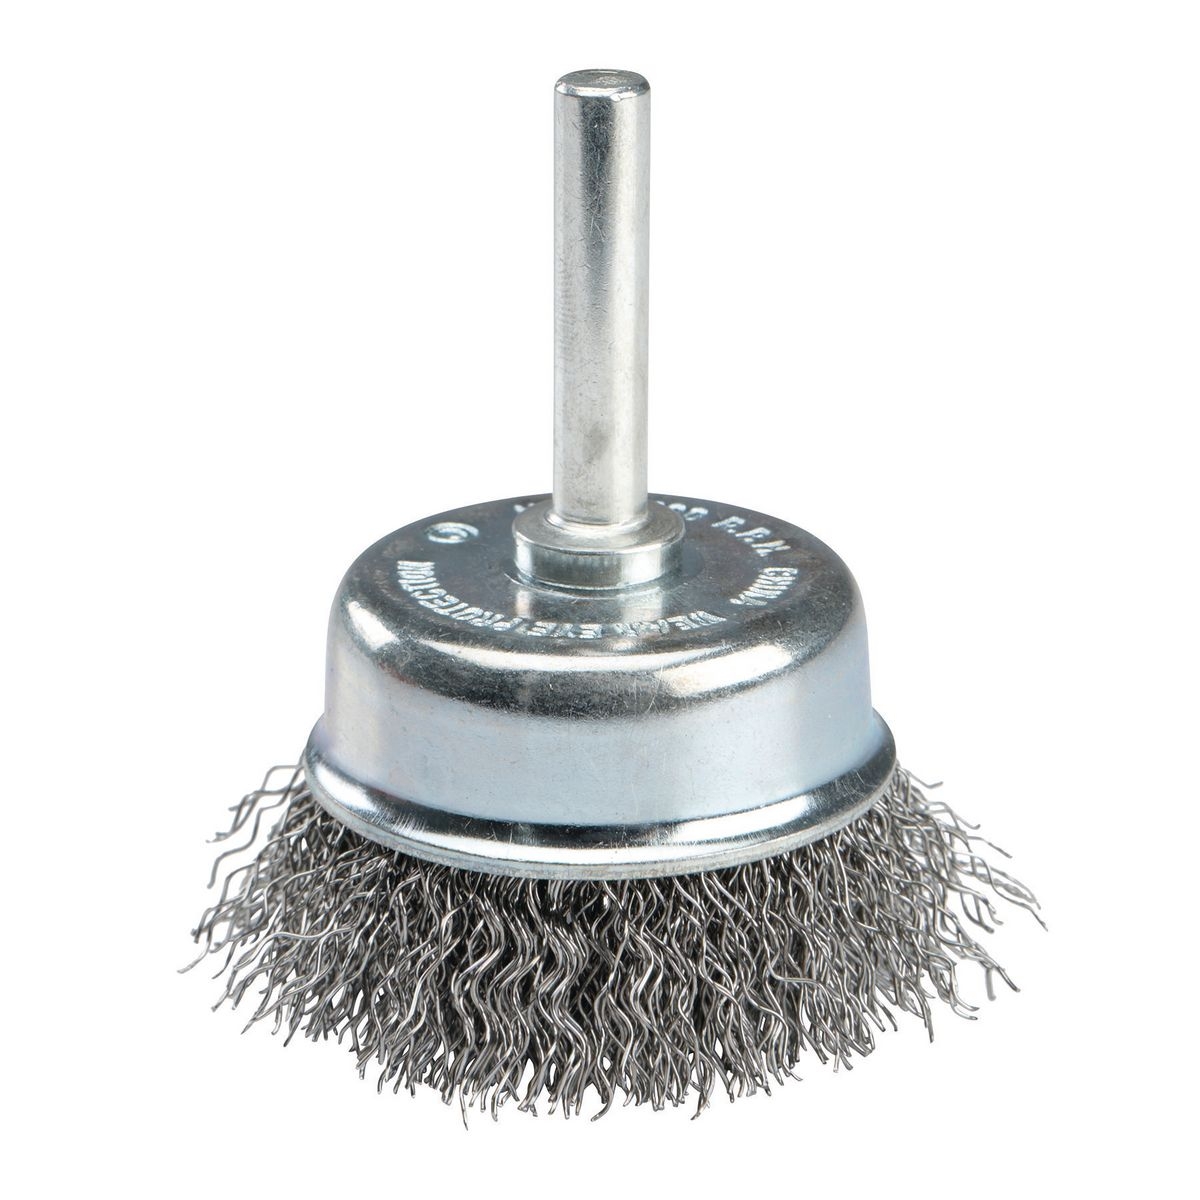 WARRIOR 2 in. Wire Cup Brush with 1/4 in. Shank - Item 42858 / 60480